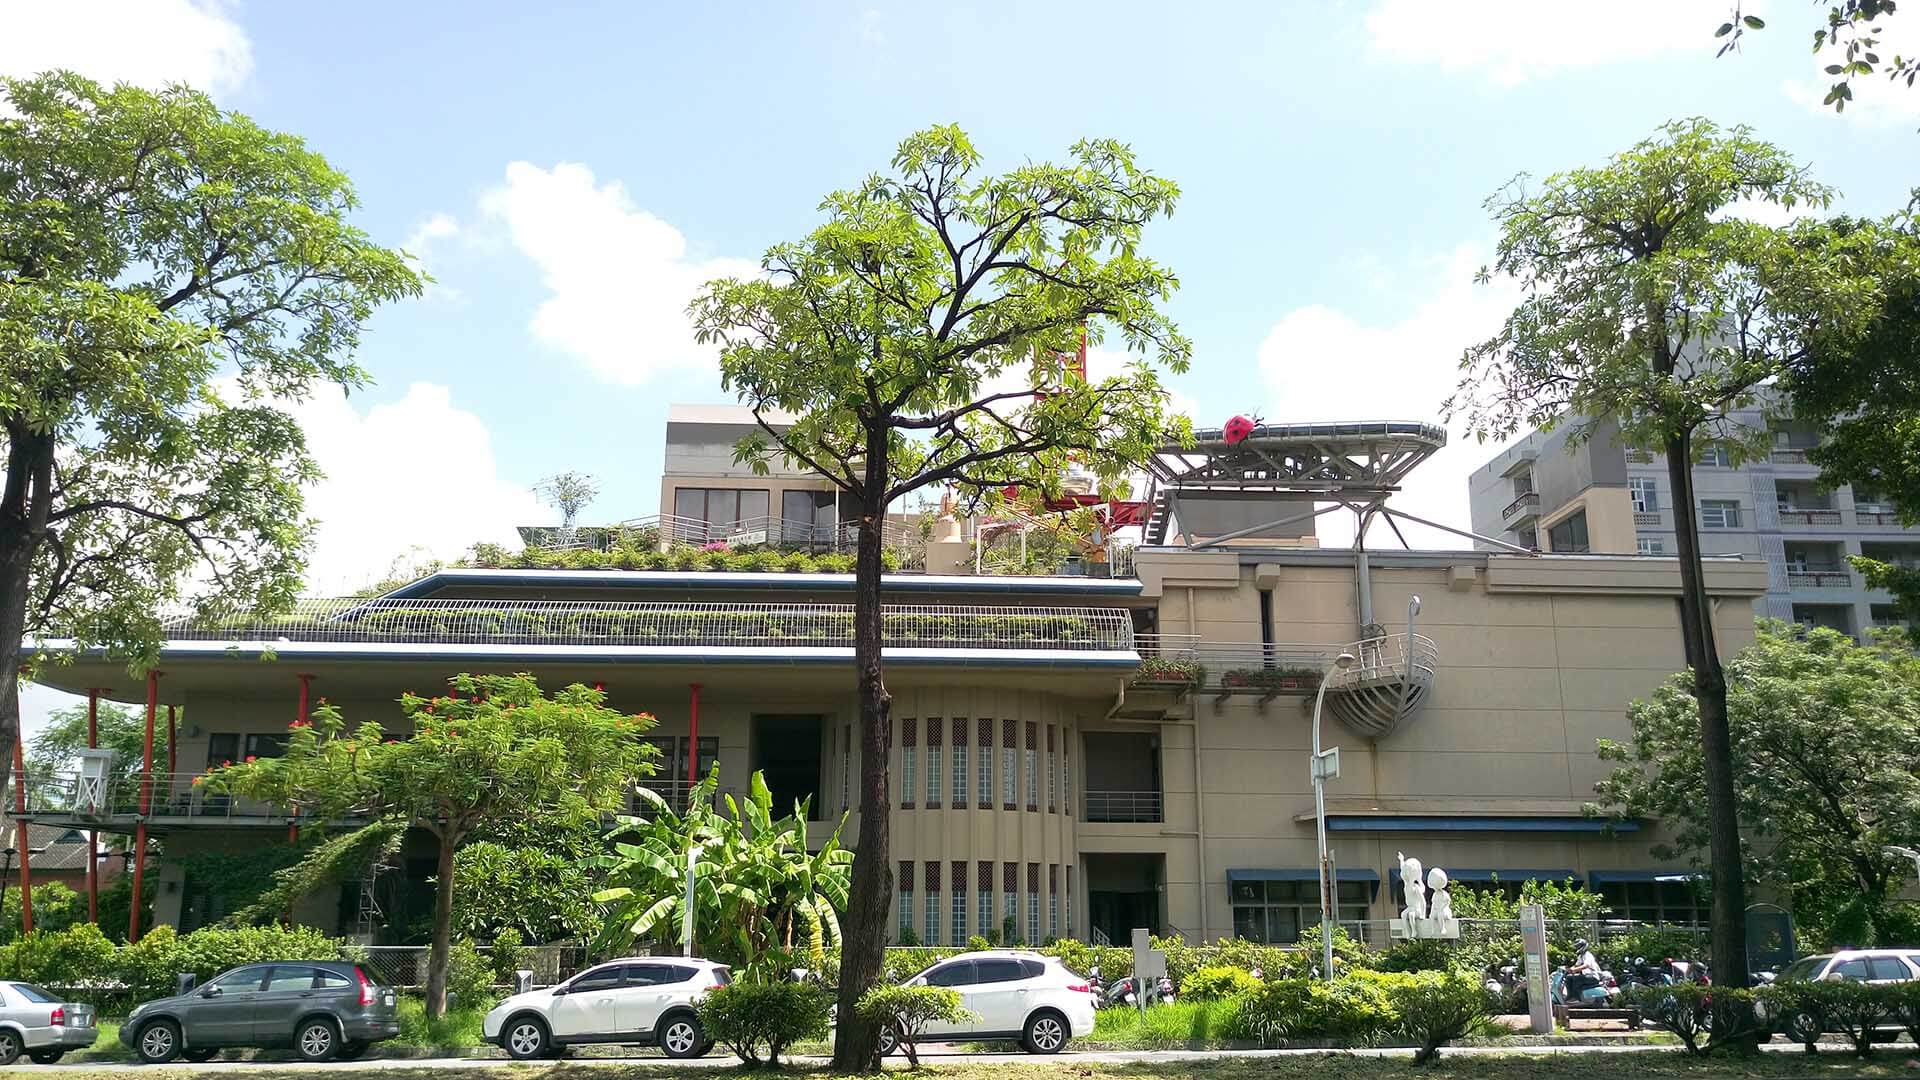 Taiwan's National Cheng Kung University has built a green building called The Magic School of Green Technology, which demonstrates the exploration and application of sustainable green technologies such as sustainable development, environmental protection and low-carbon energy conservation.